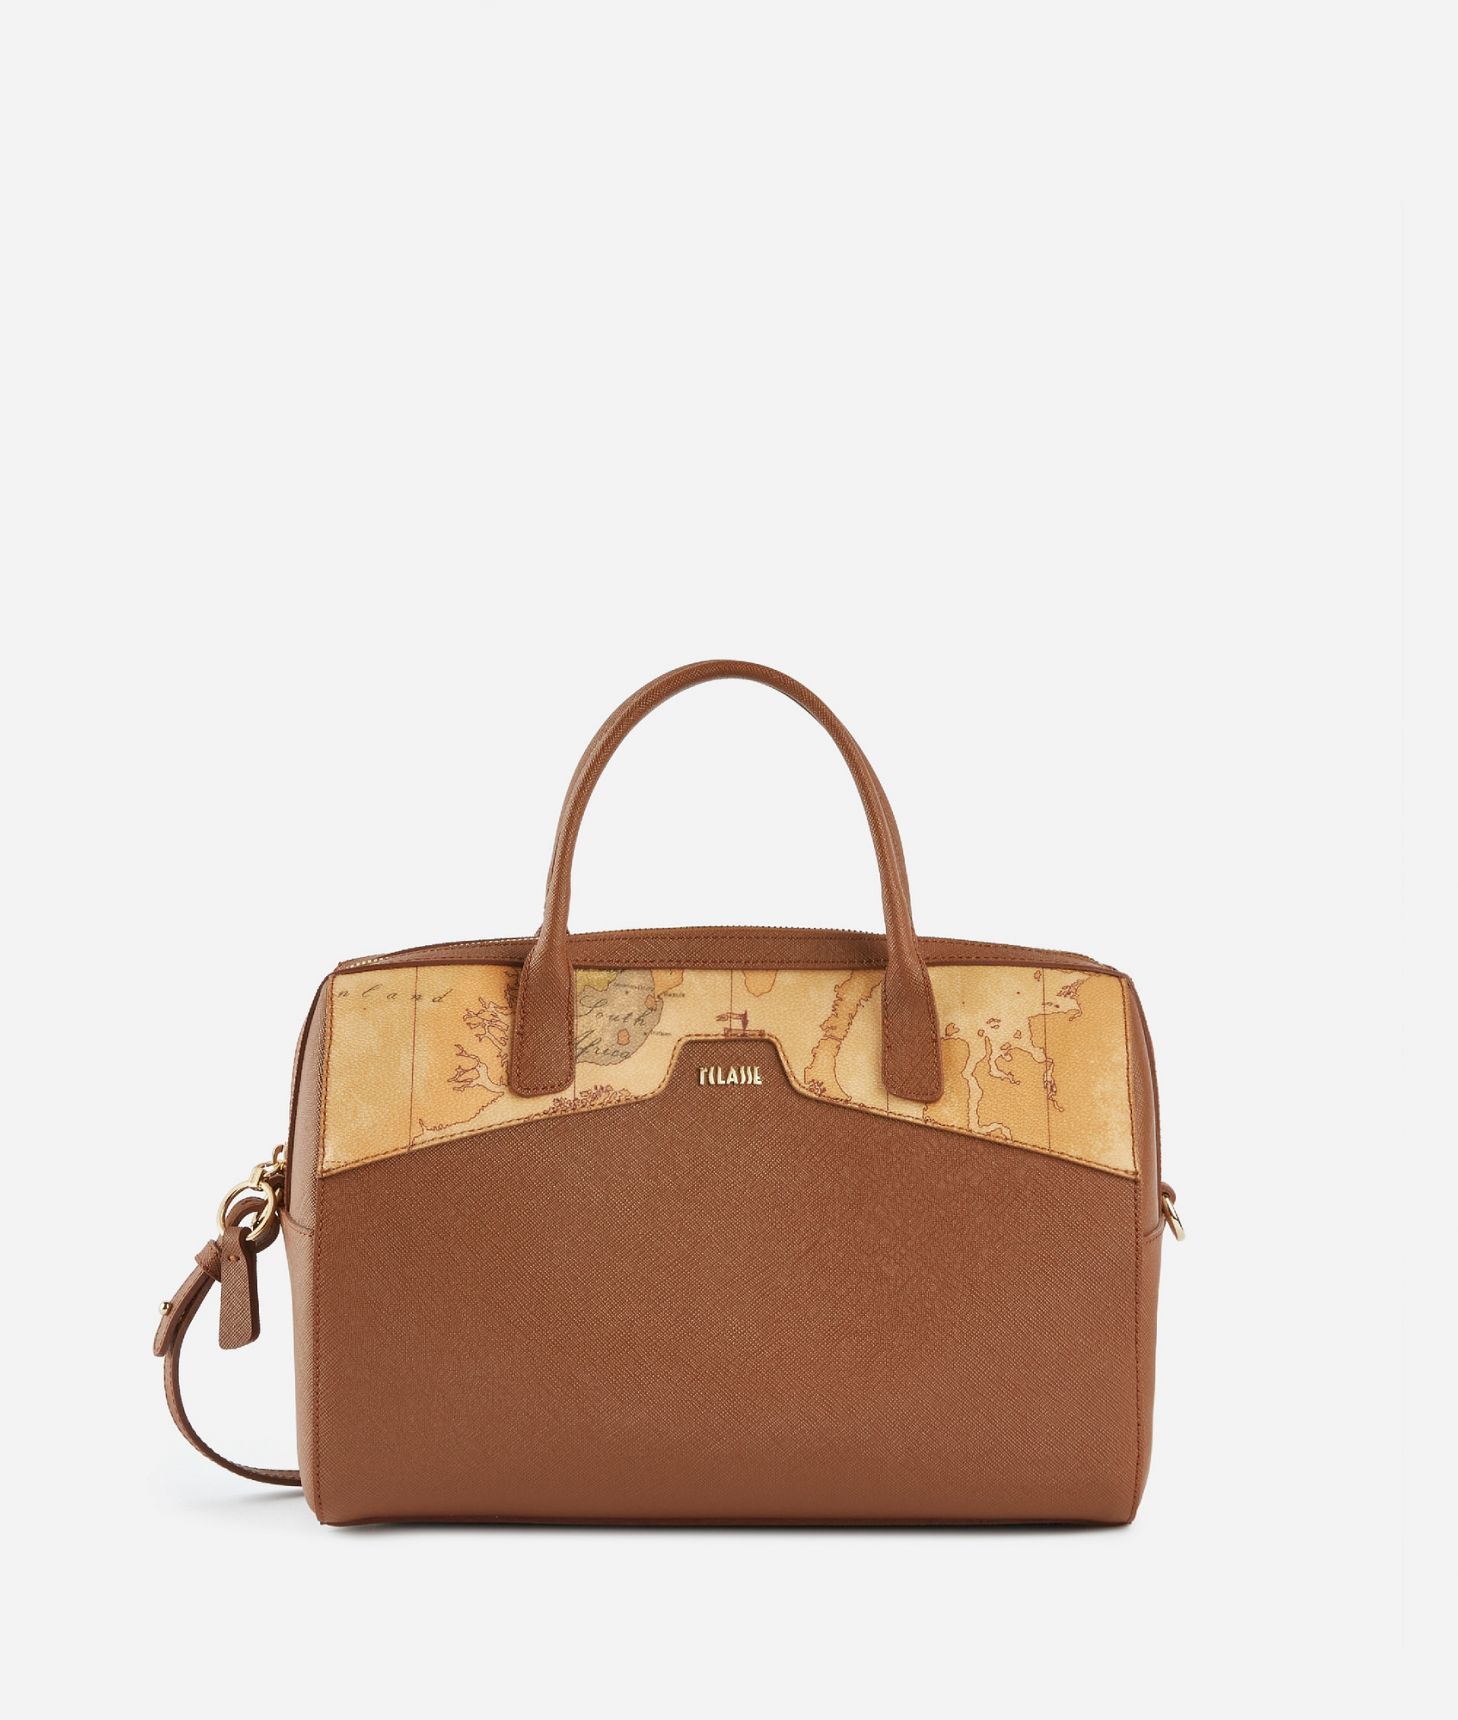 Glam City bowler bag with crossbody strap Chestnut,front